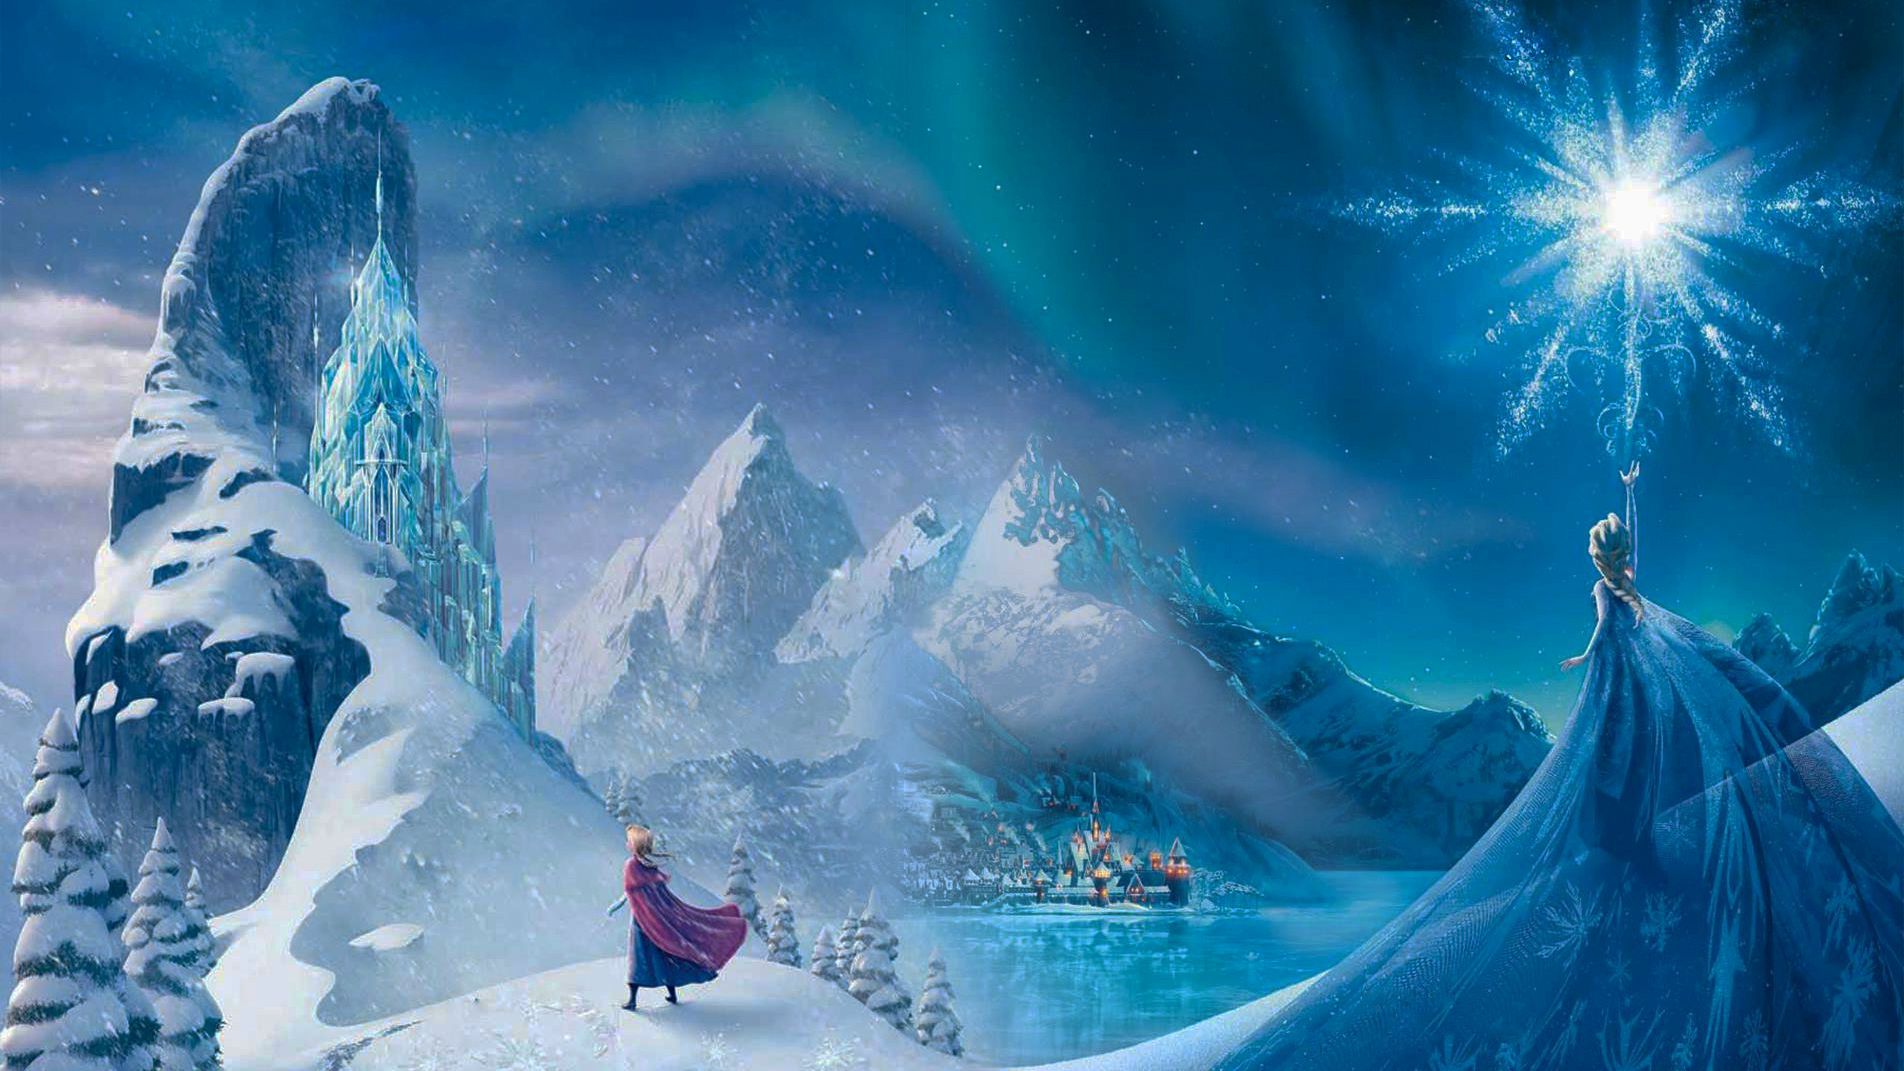 1080p Wallpaper Bining The Two French Frozen Posters I